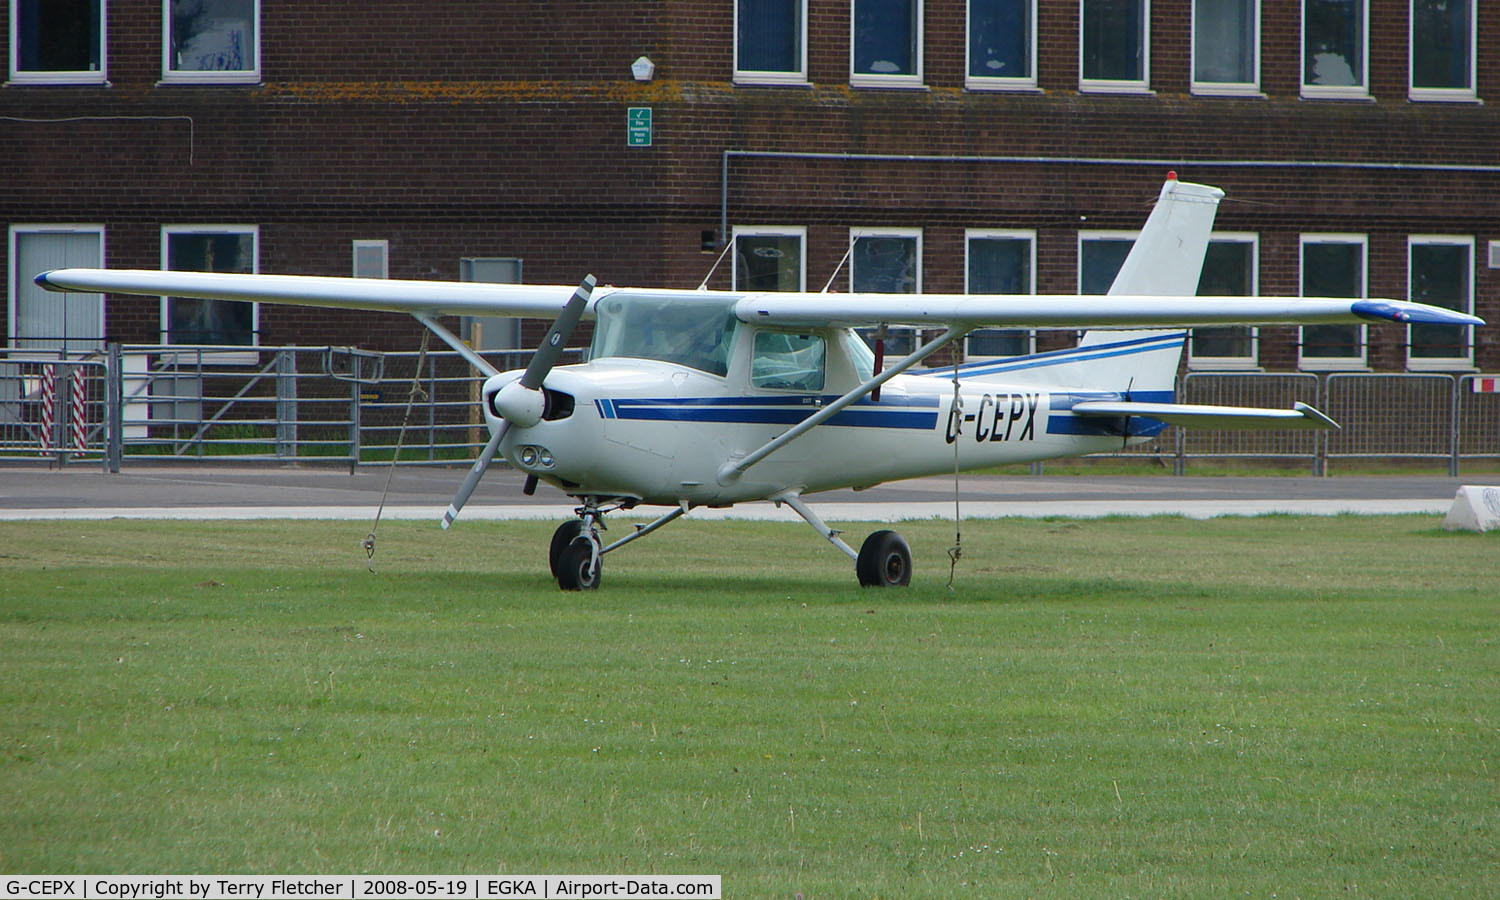 G-CEPX, 1983 Cessna 152 C/N 152-85792, A pleasant May evening at Shoreham Airport , Sussex , UK